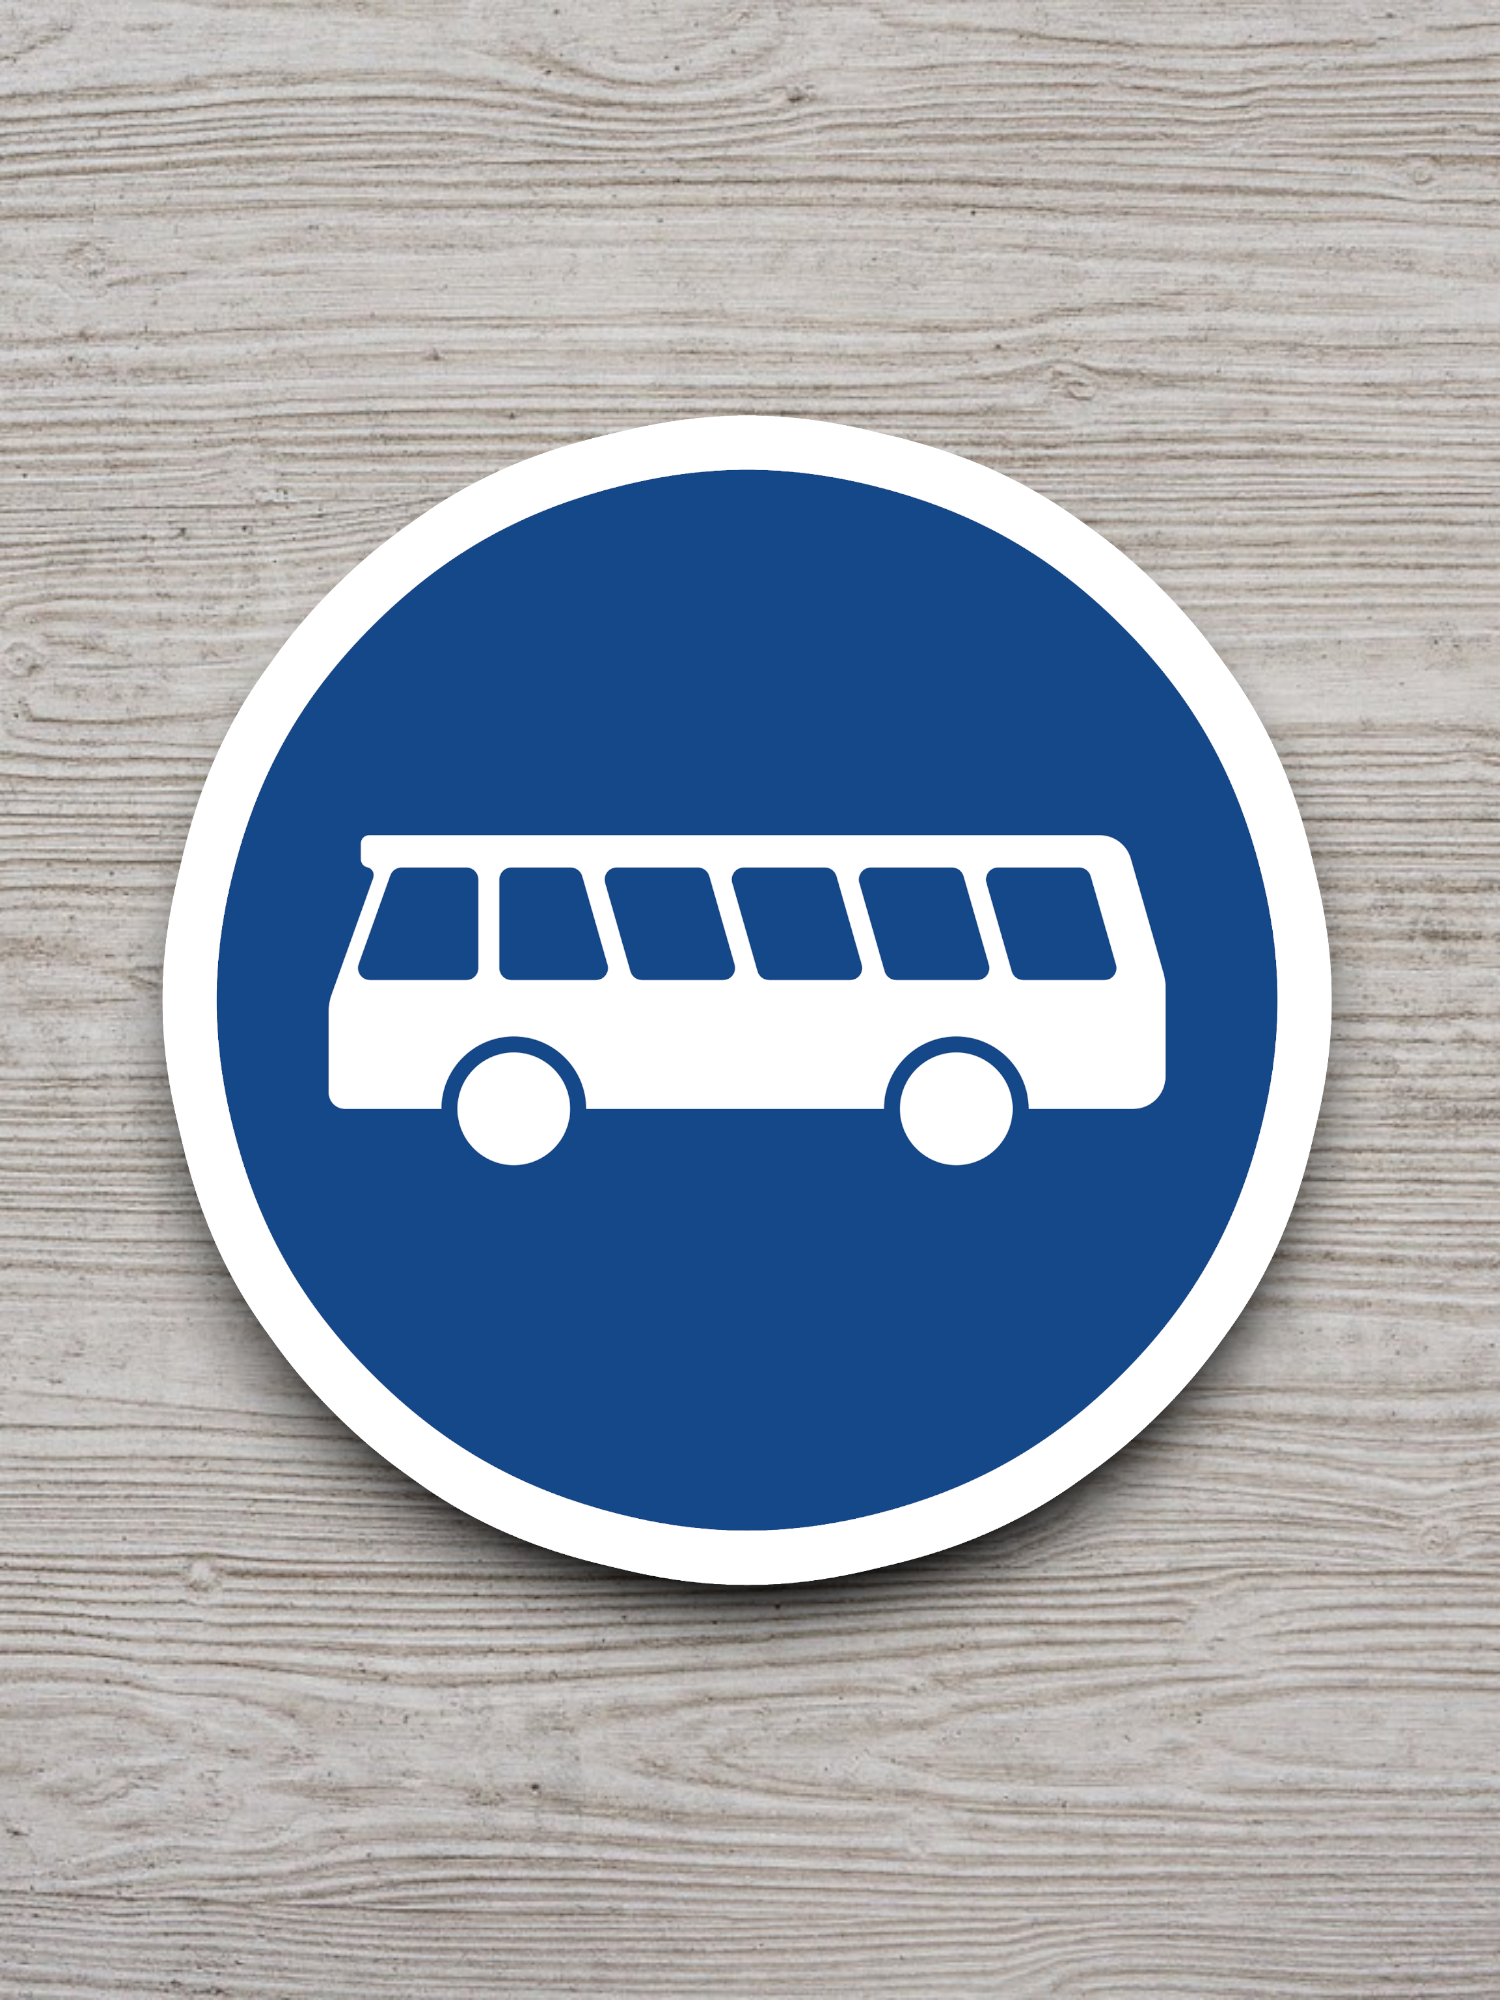 Bus Zone Ahead Road Sign Sticker